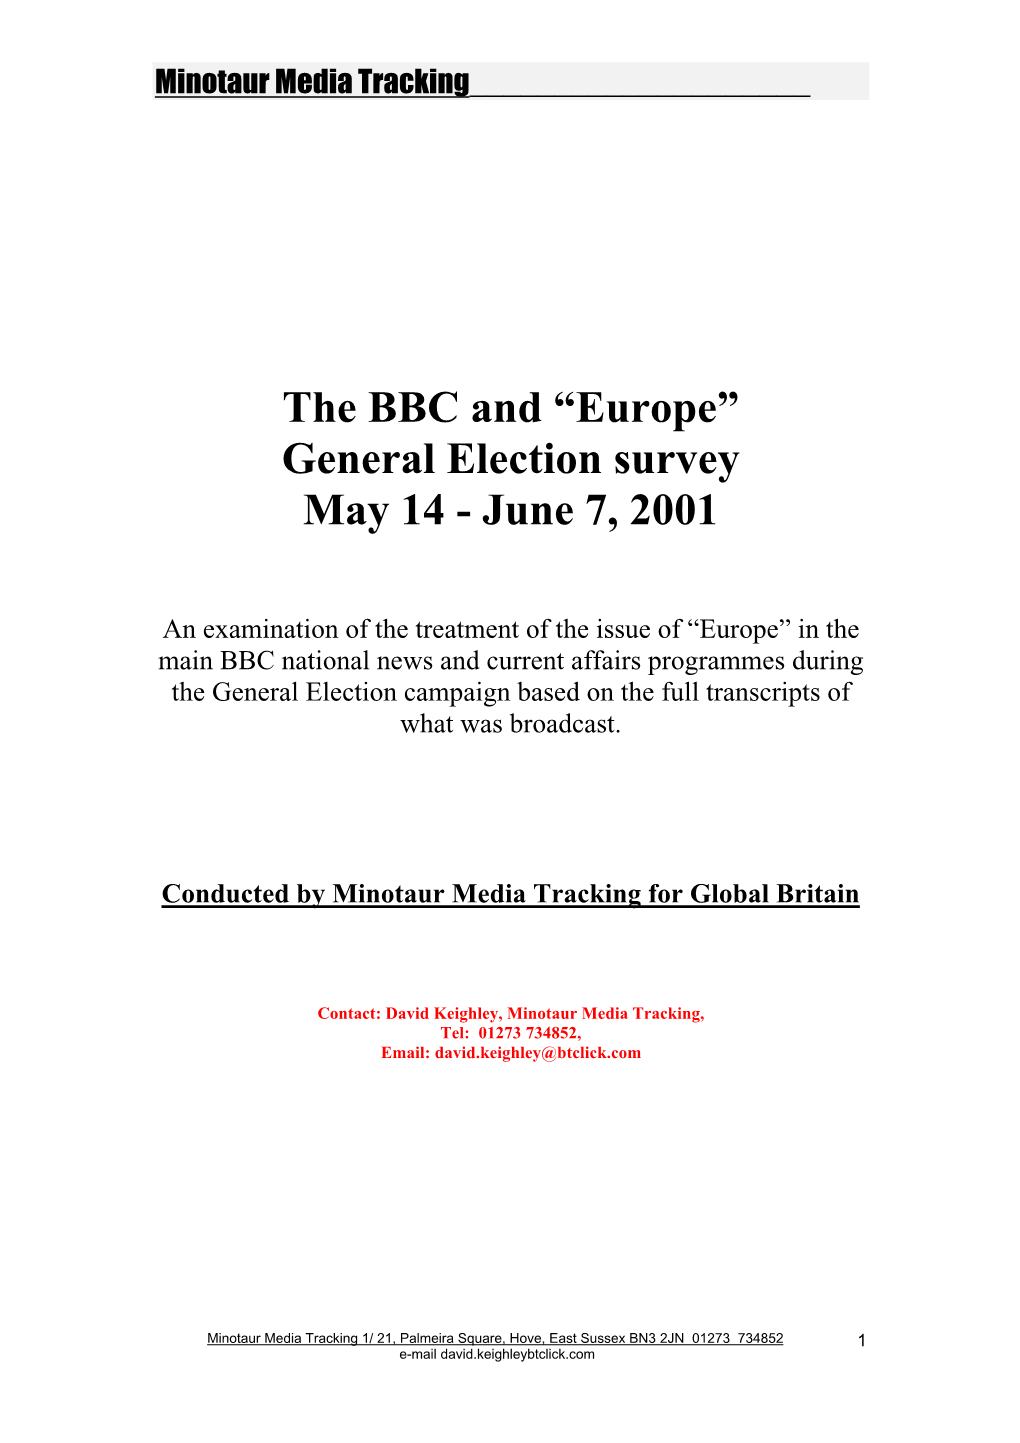 General Election Survey May 14 - June 7, 2001